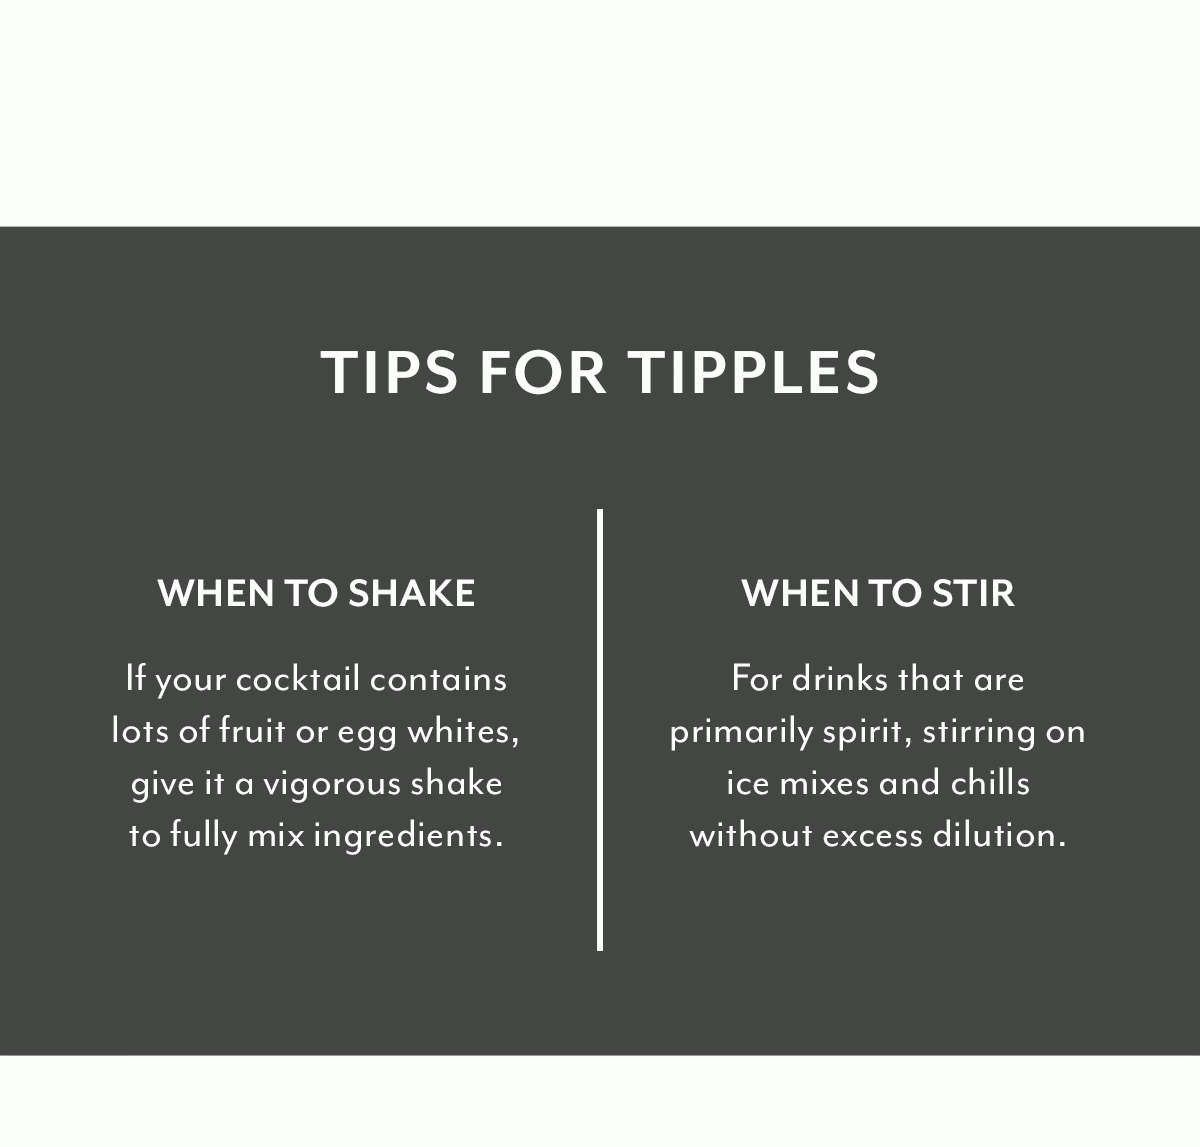 Tips for Tipples